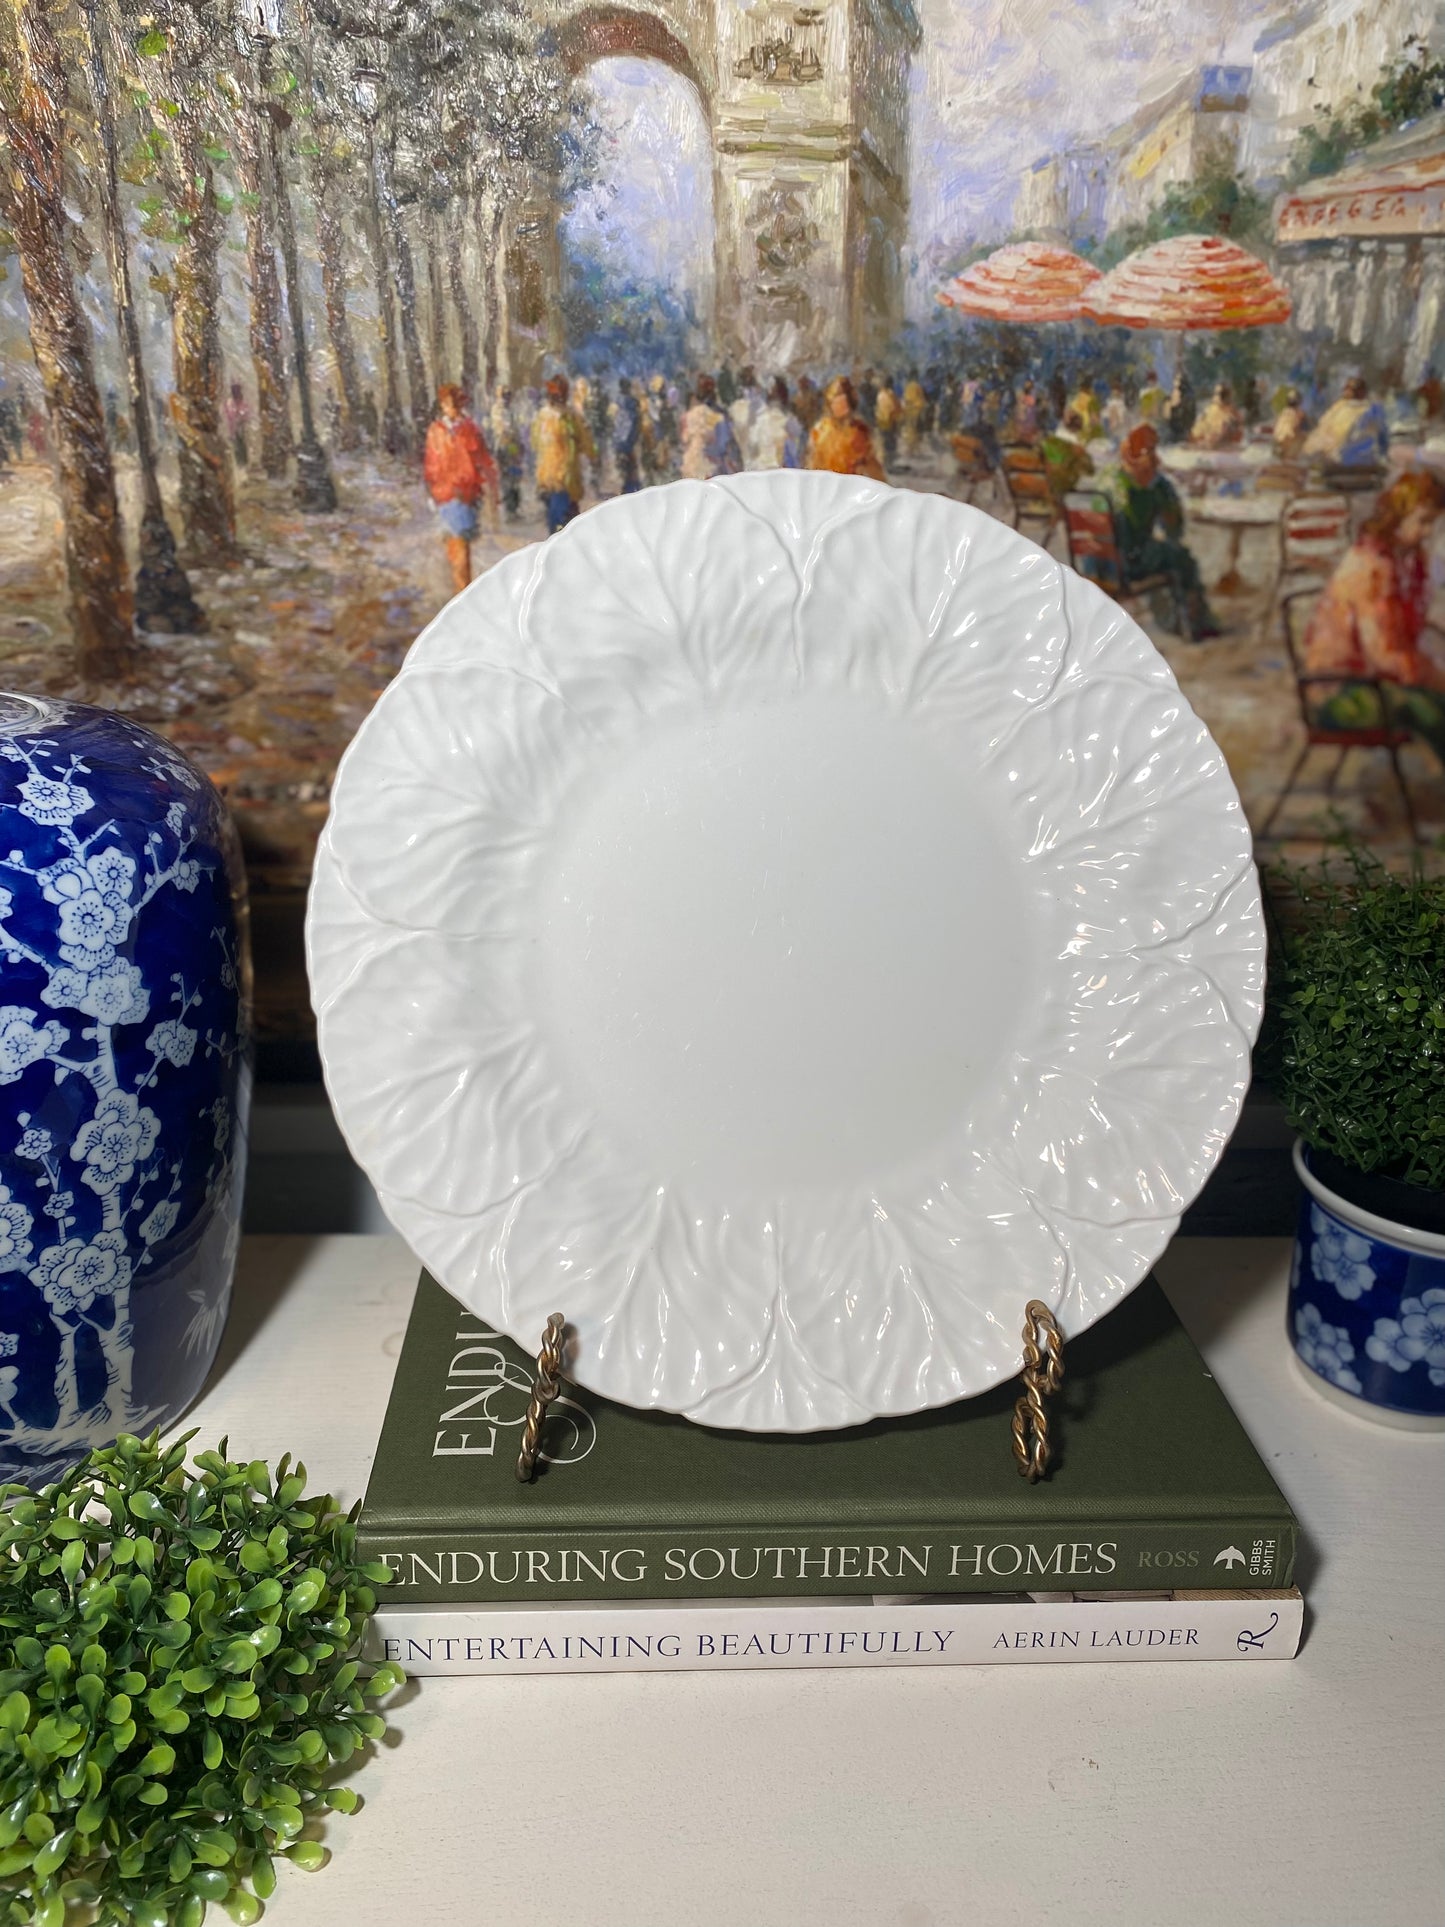 Countryware by Coalport White Cabbage Leaf Design - Made in England, 12"D - Pristine!